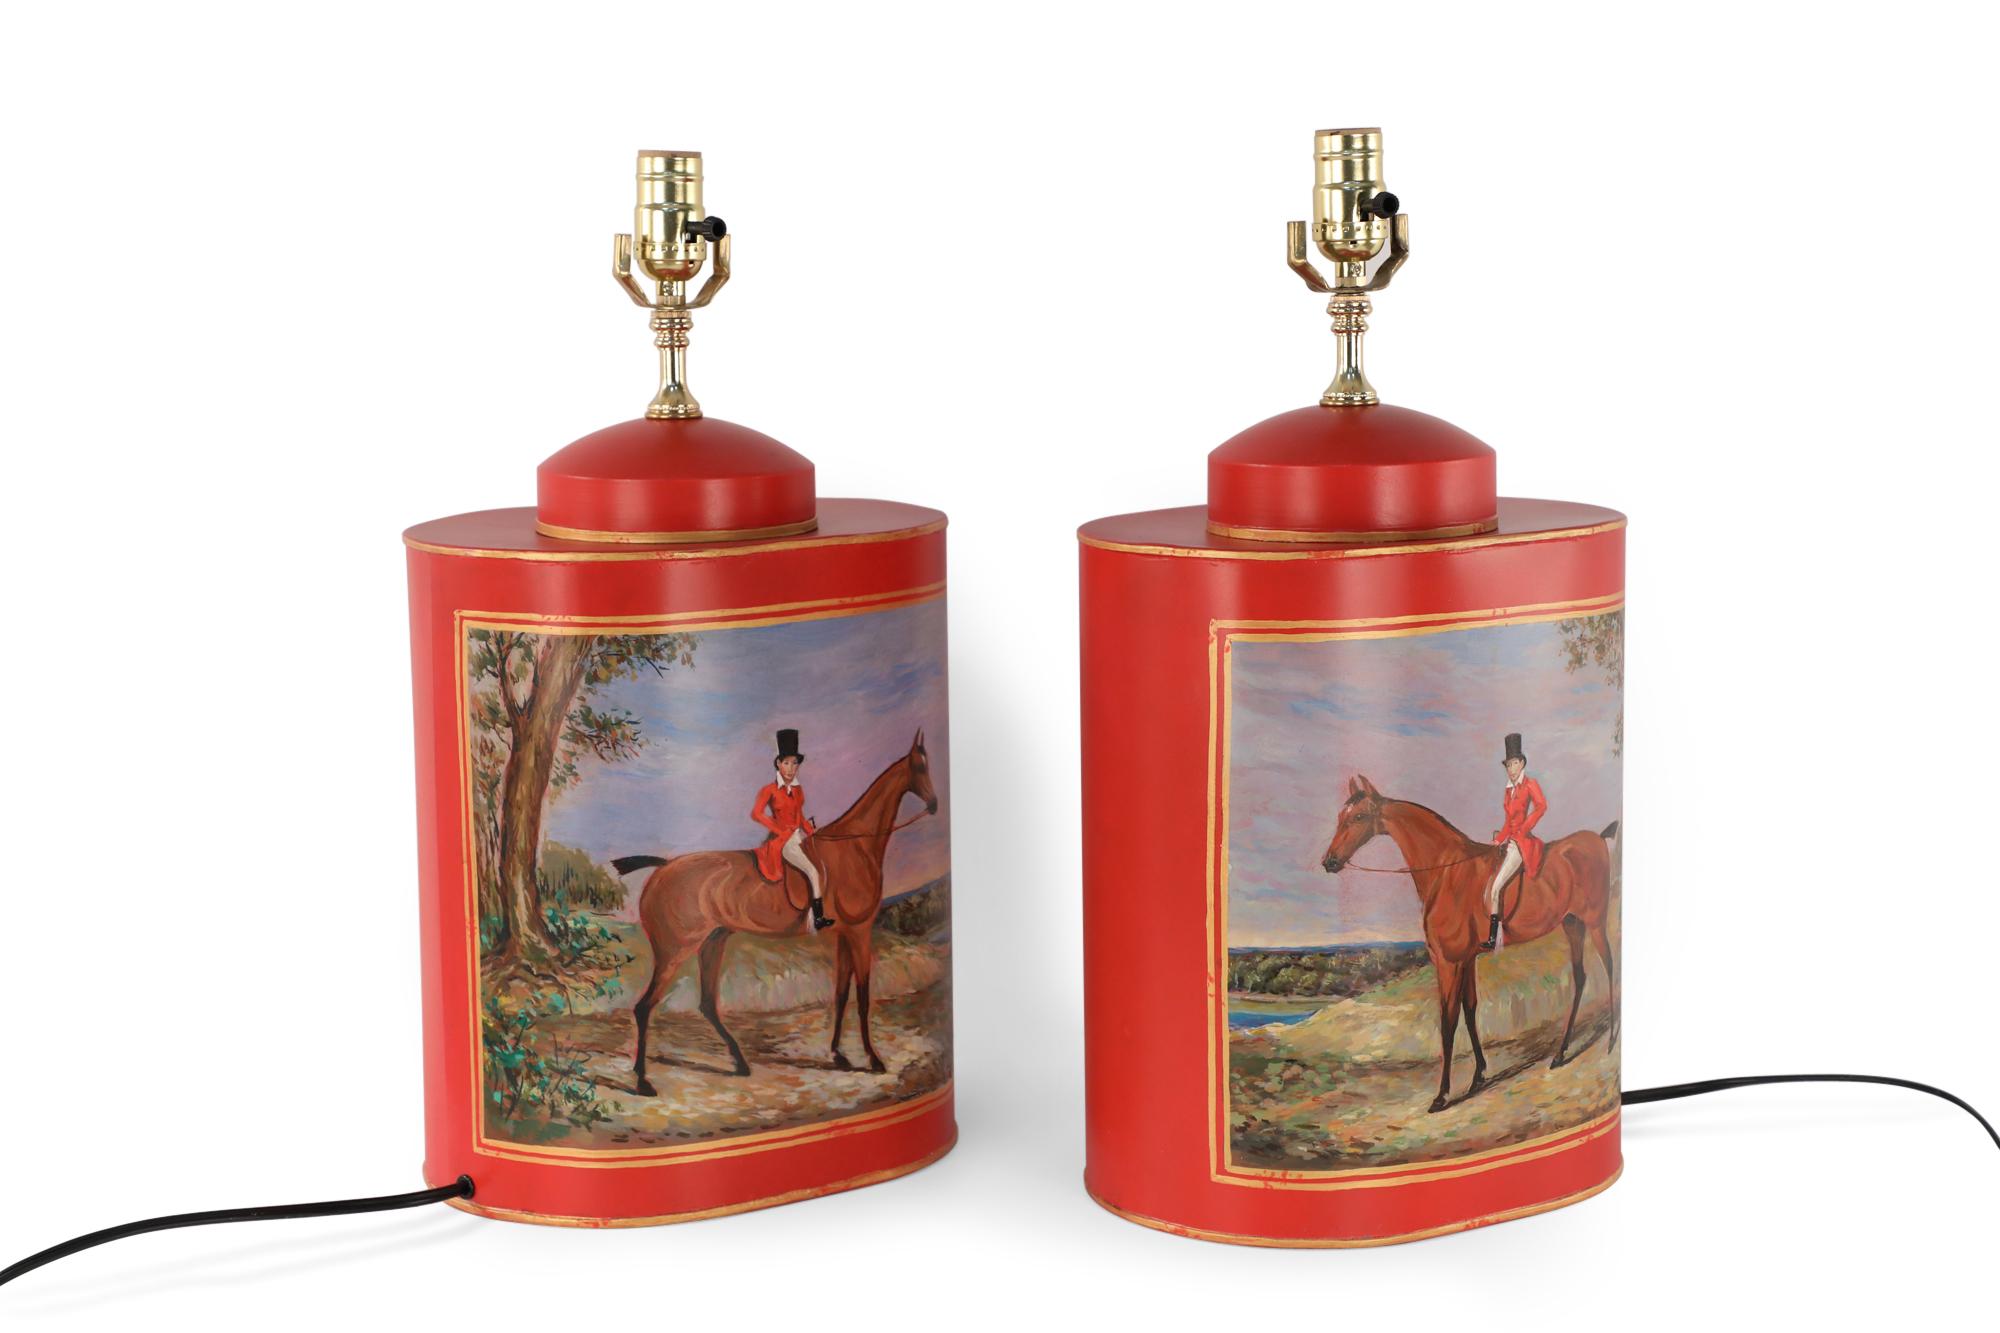 Pair of Chinese red and gold tole table lamps with canister-shaped bodies and brass hardware featuring an equestrian scene typical of 19th century European paintings.